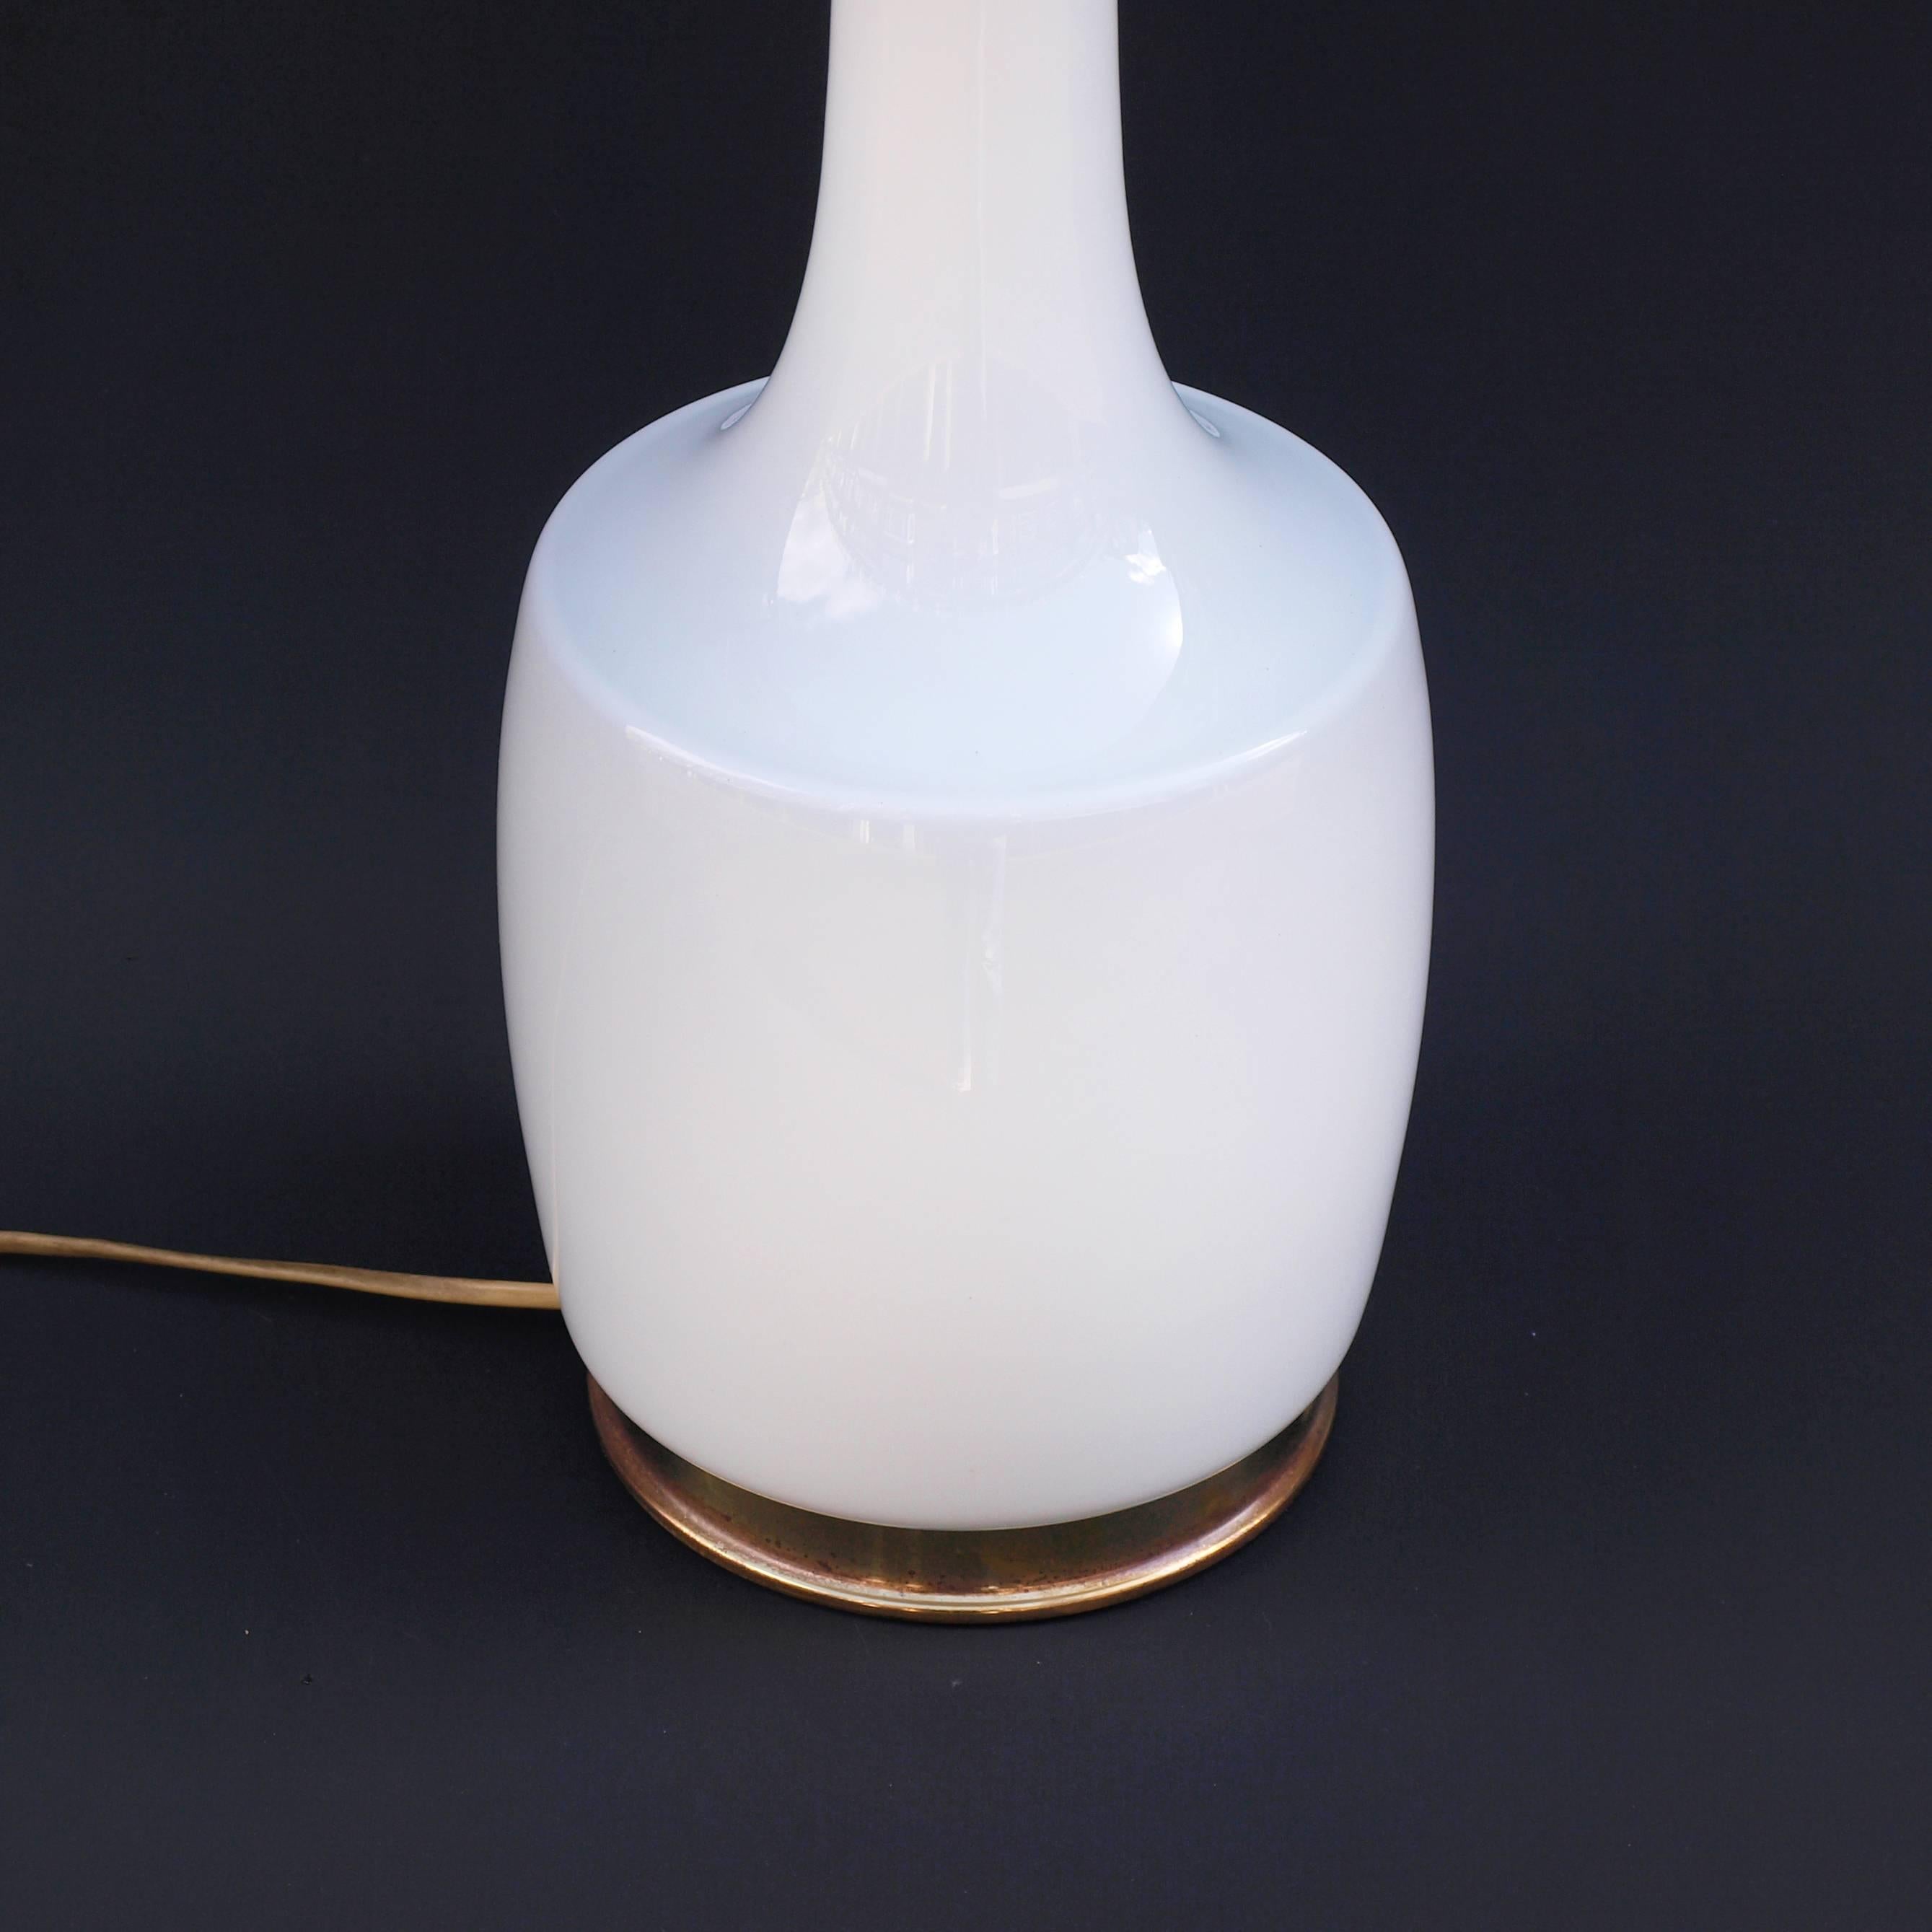 A 1960s white opaline glass lamp designed by Holm Sorensen. An exceptional design in its simplicity of form, function and material, finished with brass fittings to base and neck. Scandinavian minimalism at it's best.
 